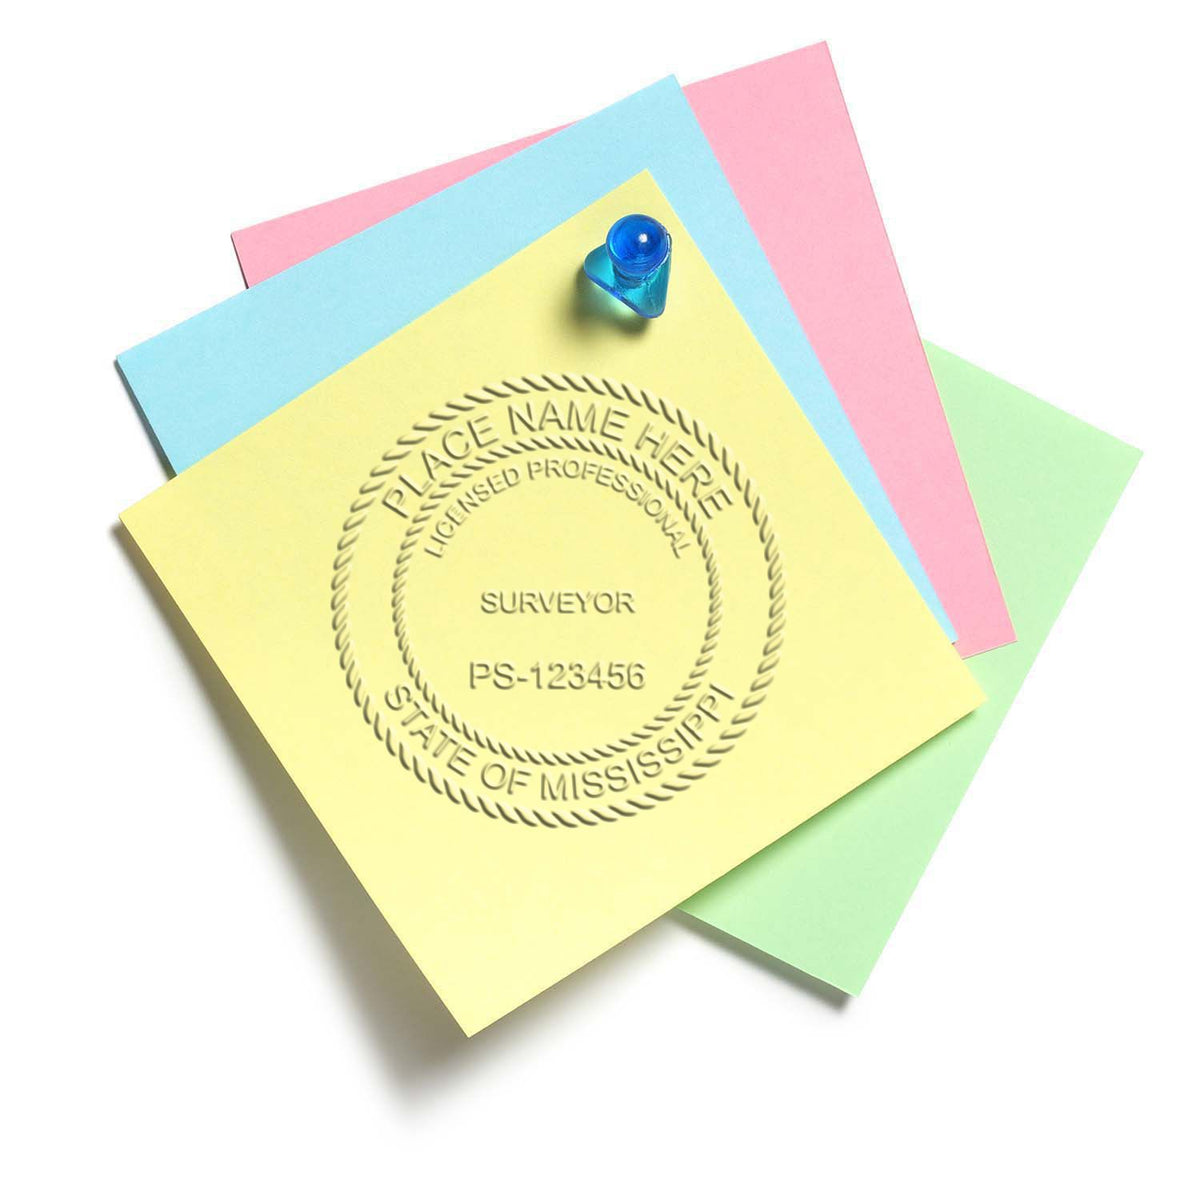 An in use photo of the Gift Mississippi Land Surveyor Seal showing a sample imprint on a cardstock